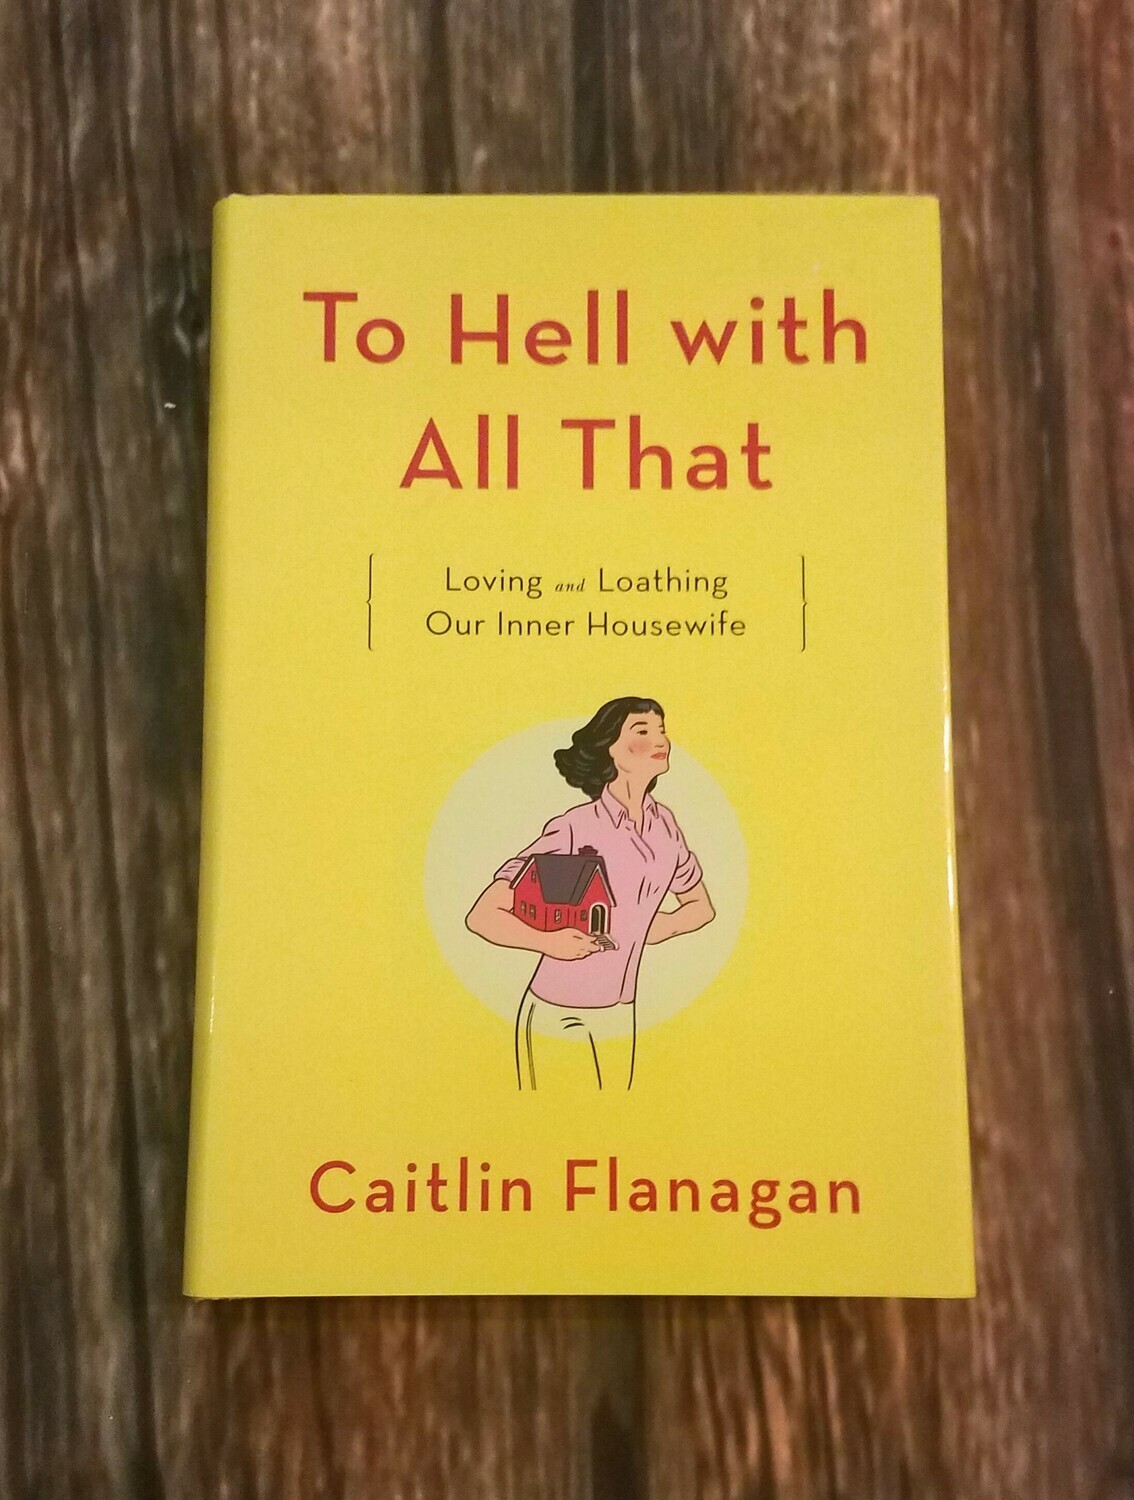 To Hell with All That by Caitlin Flanagan